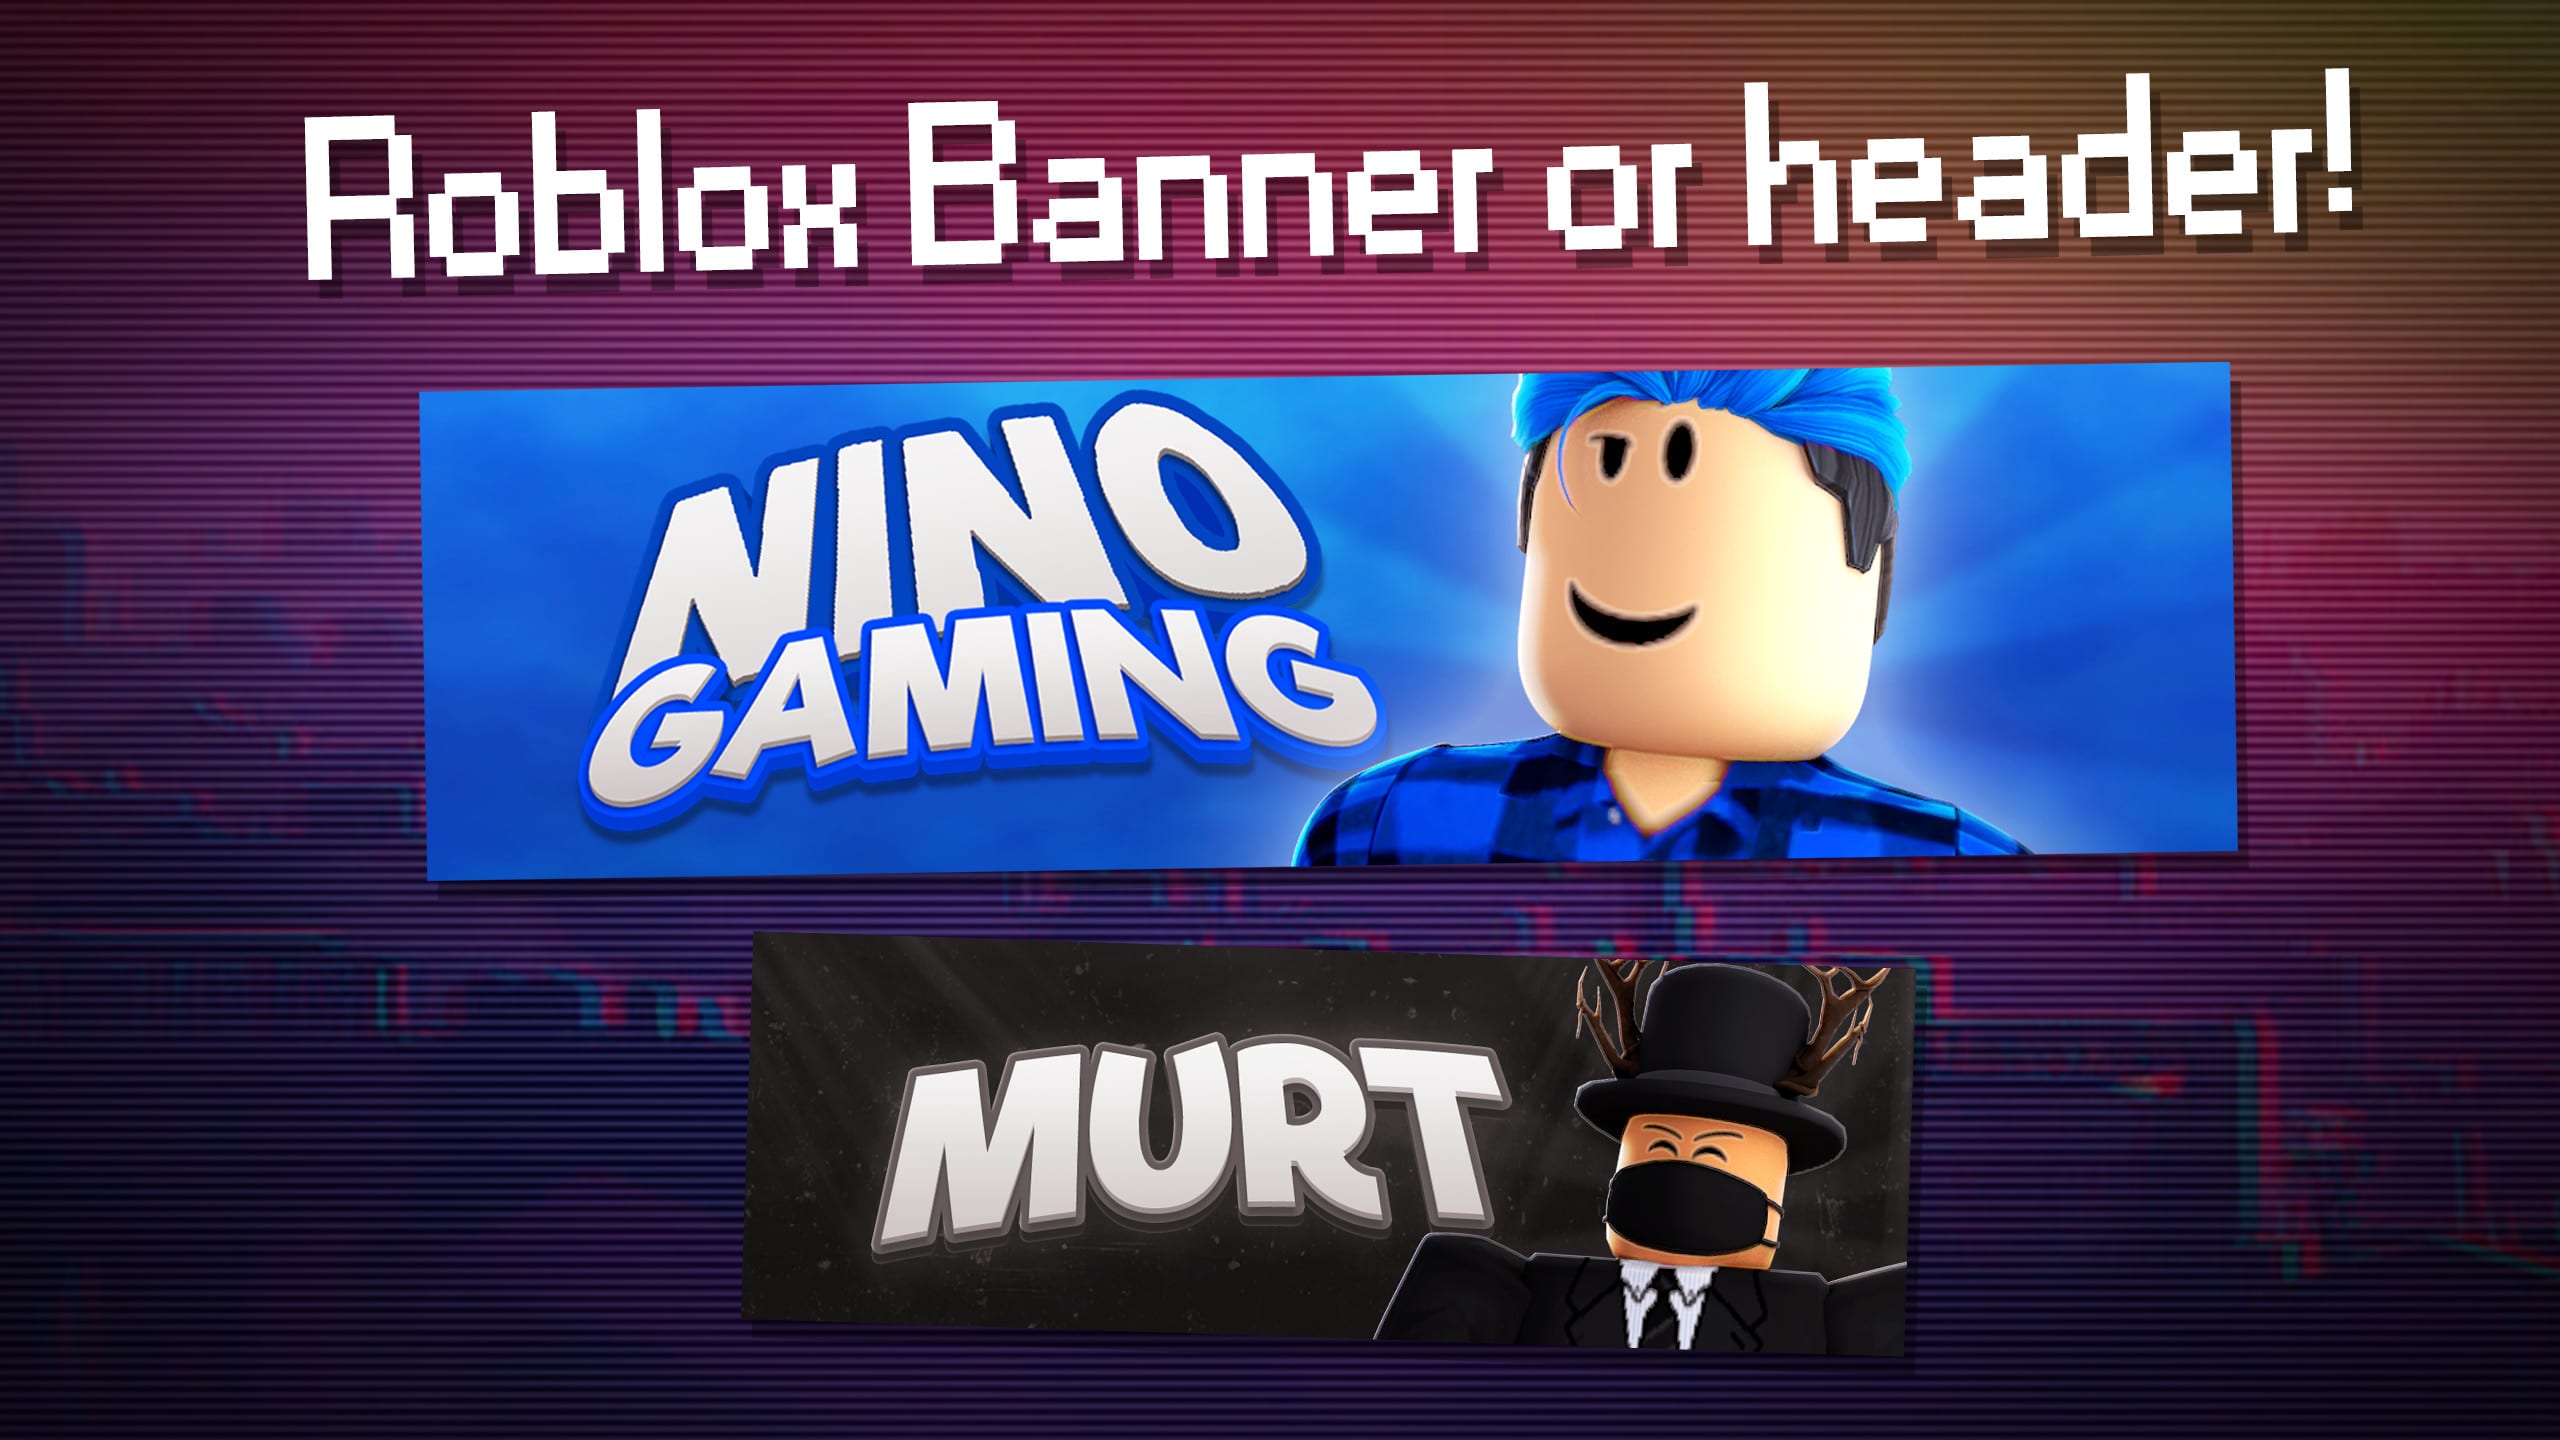 Design A Professional Roblox Banner Or Header By Frxday Fiverr - roblox banners for ads